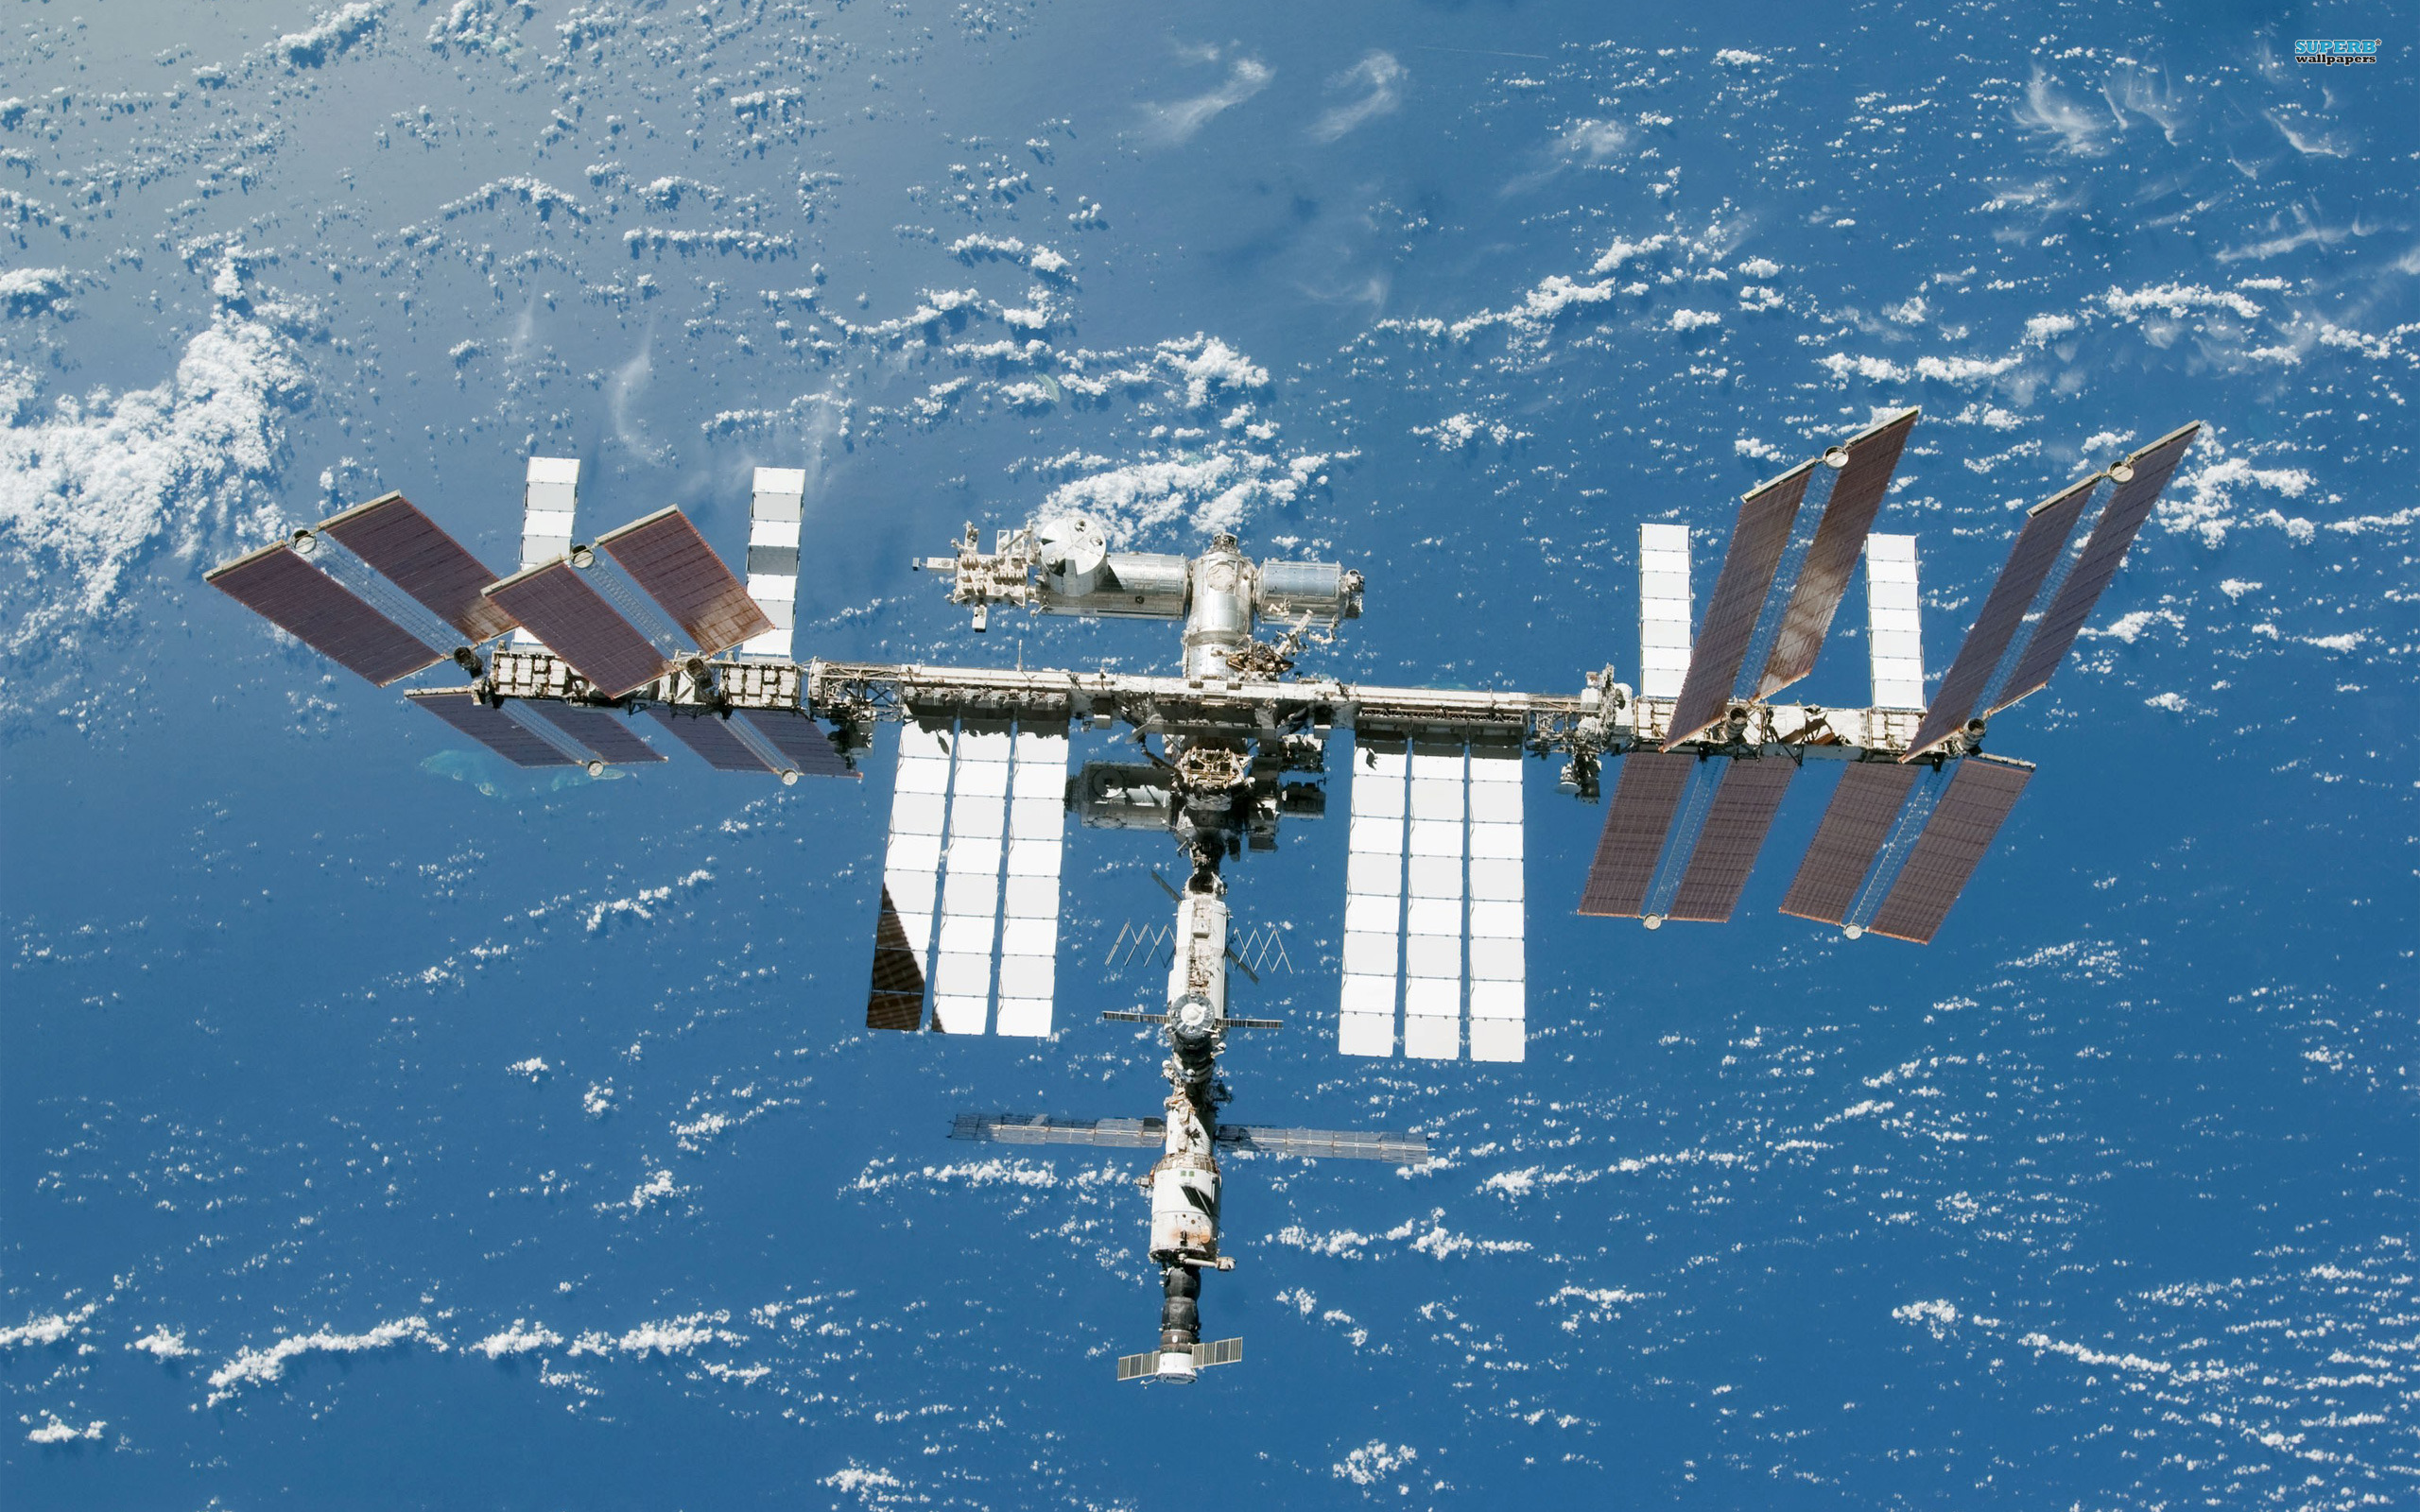 International Space Station Wallpaper - Pics about space